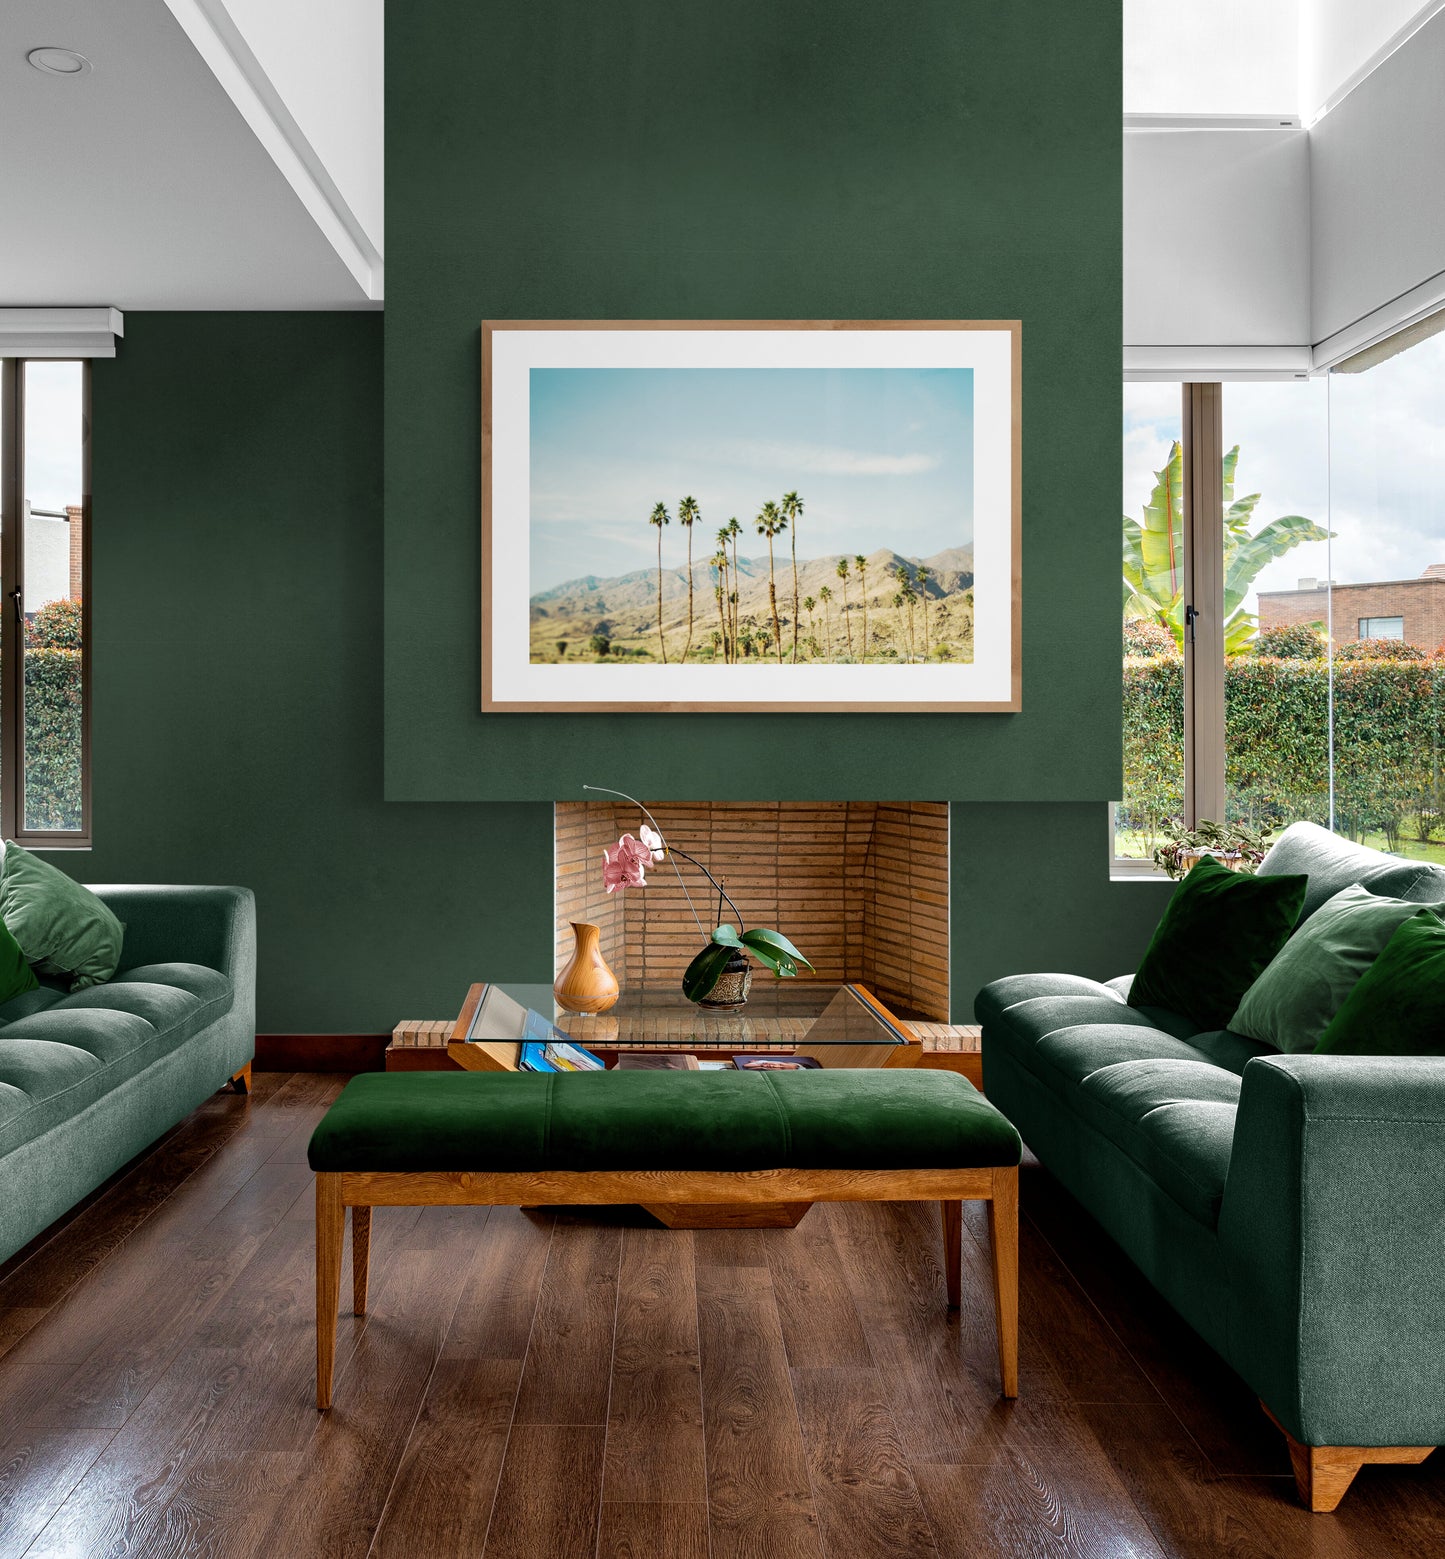 Photograph of Palm Trees of Palm Springs as wall art in a living room